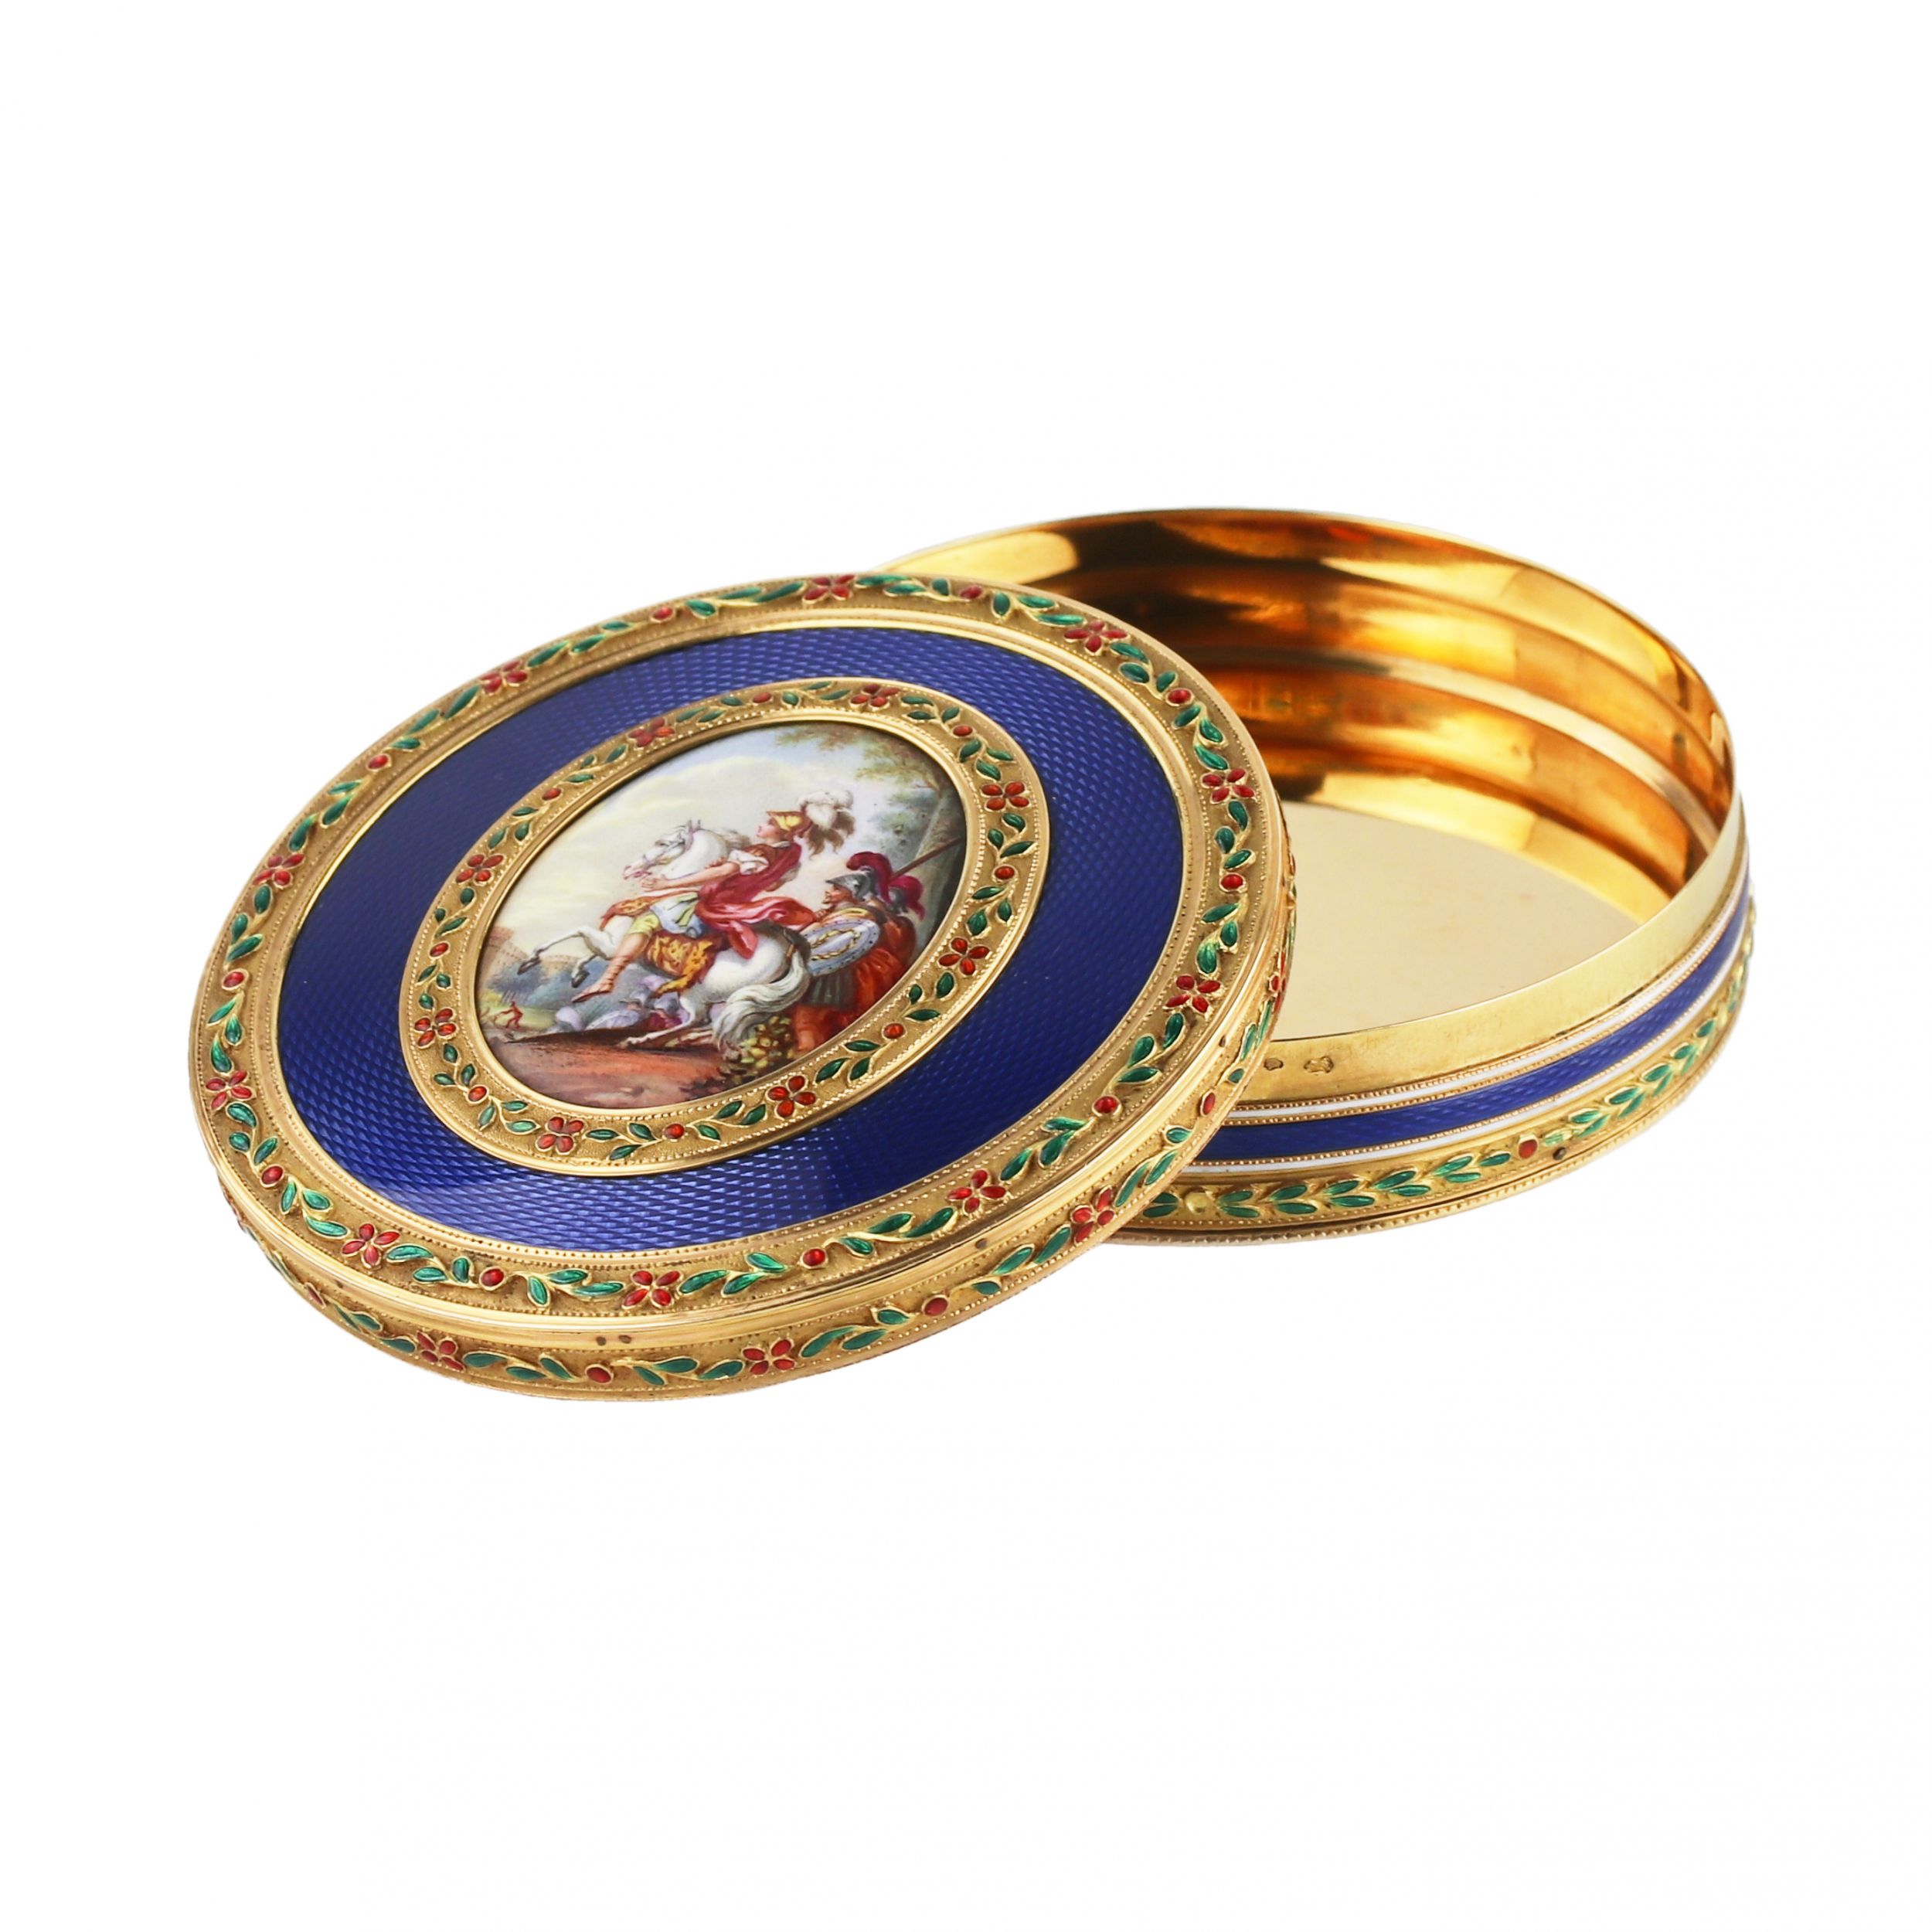 French gilded snuffbox of the late 18th century, with enamel decoration and painting. - Image 6 of 10